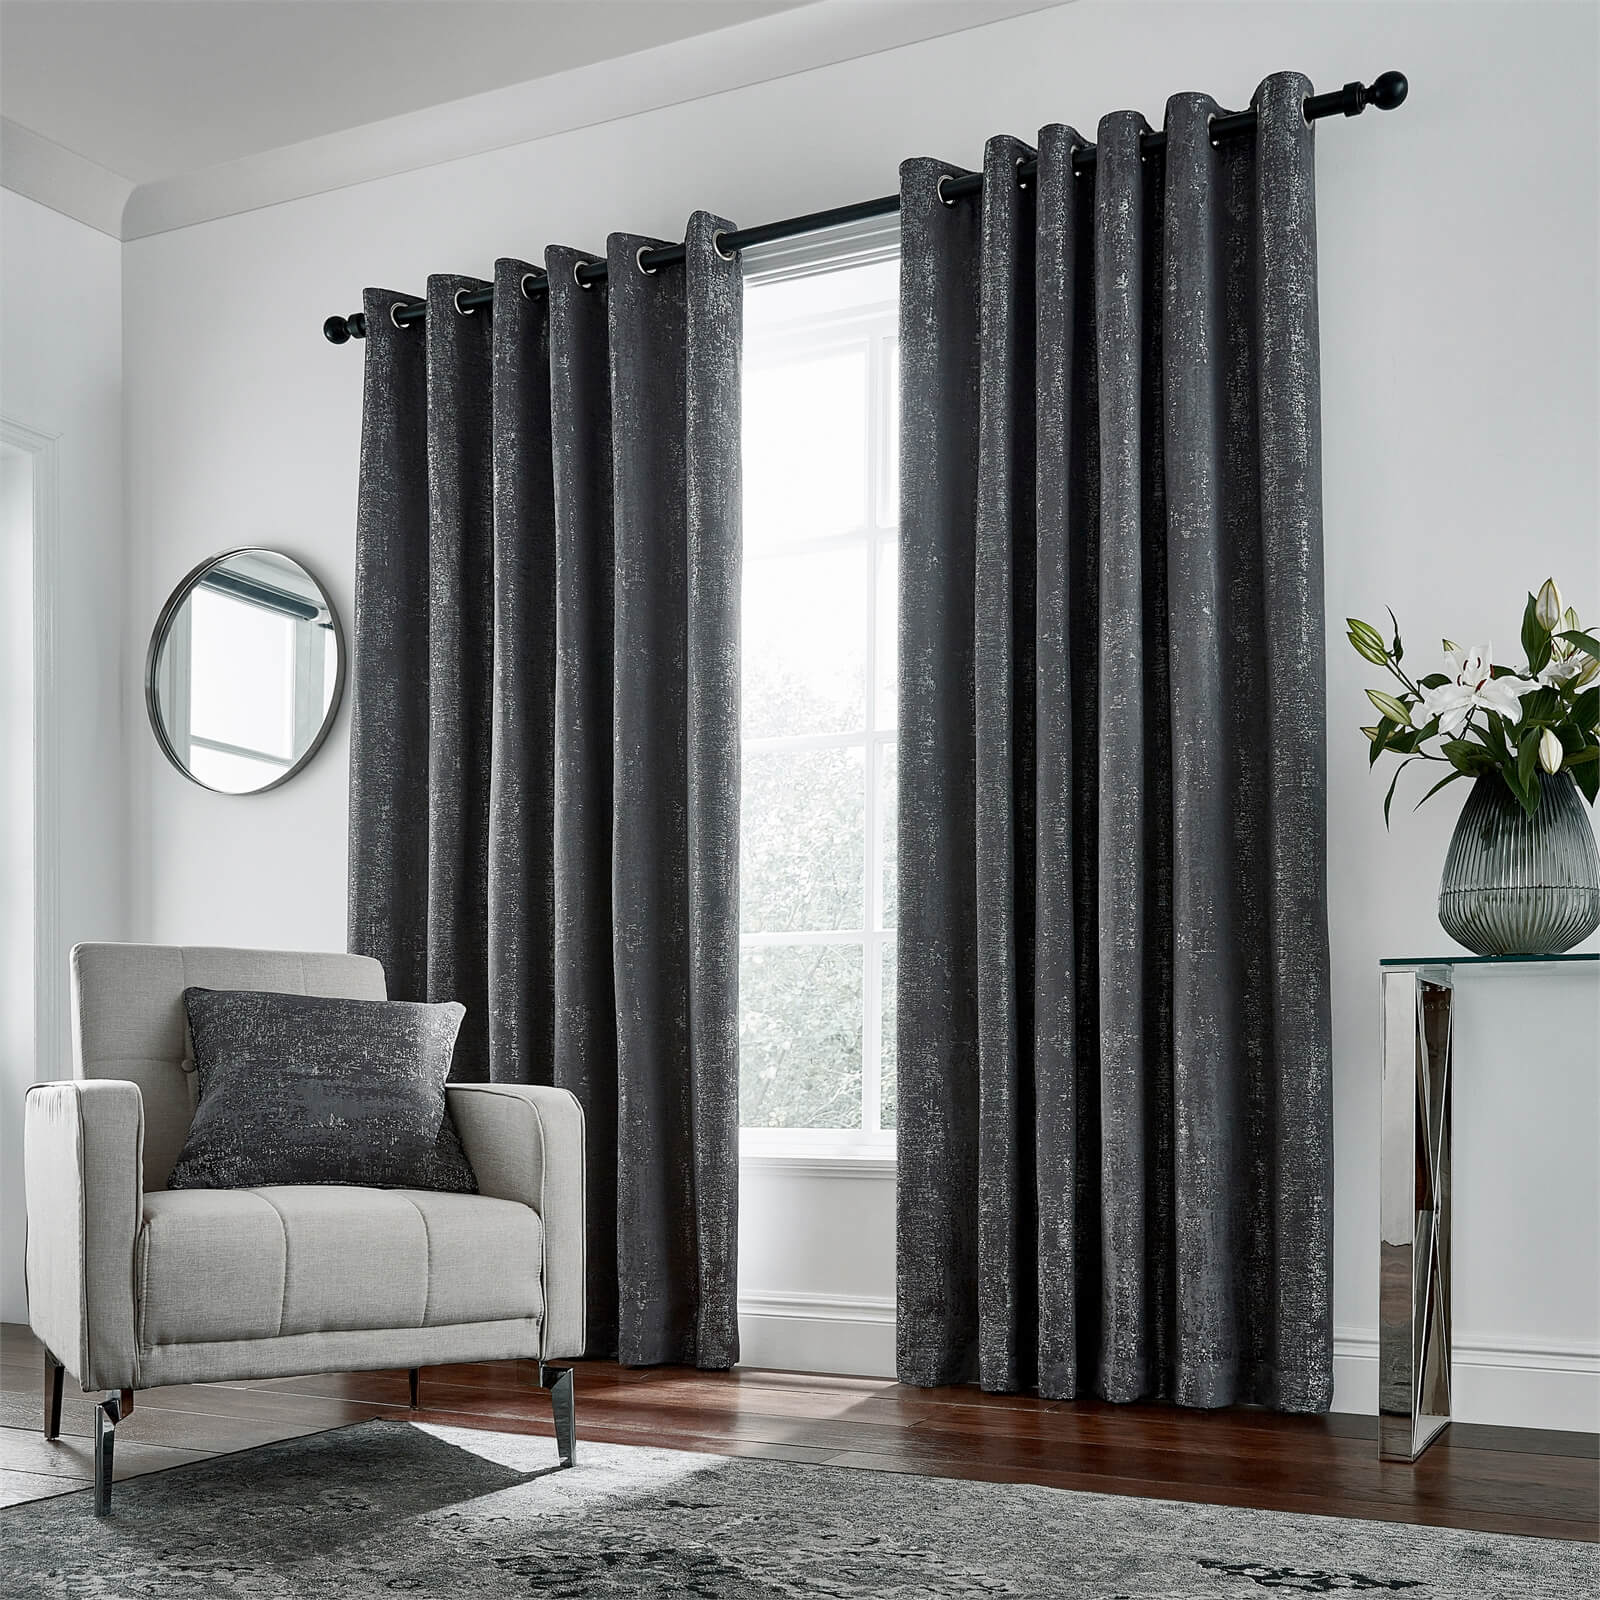 Peacock Blue Hotel Collection Roma Lined Curtains 66 x 90 - Gunmetal